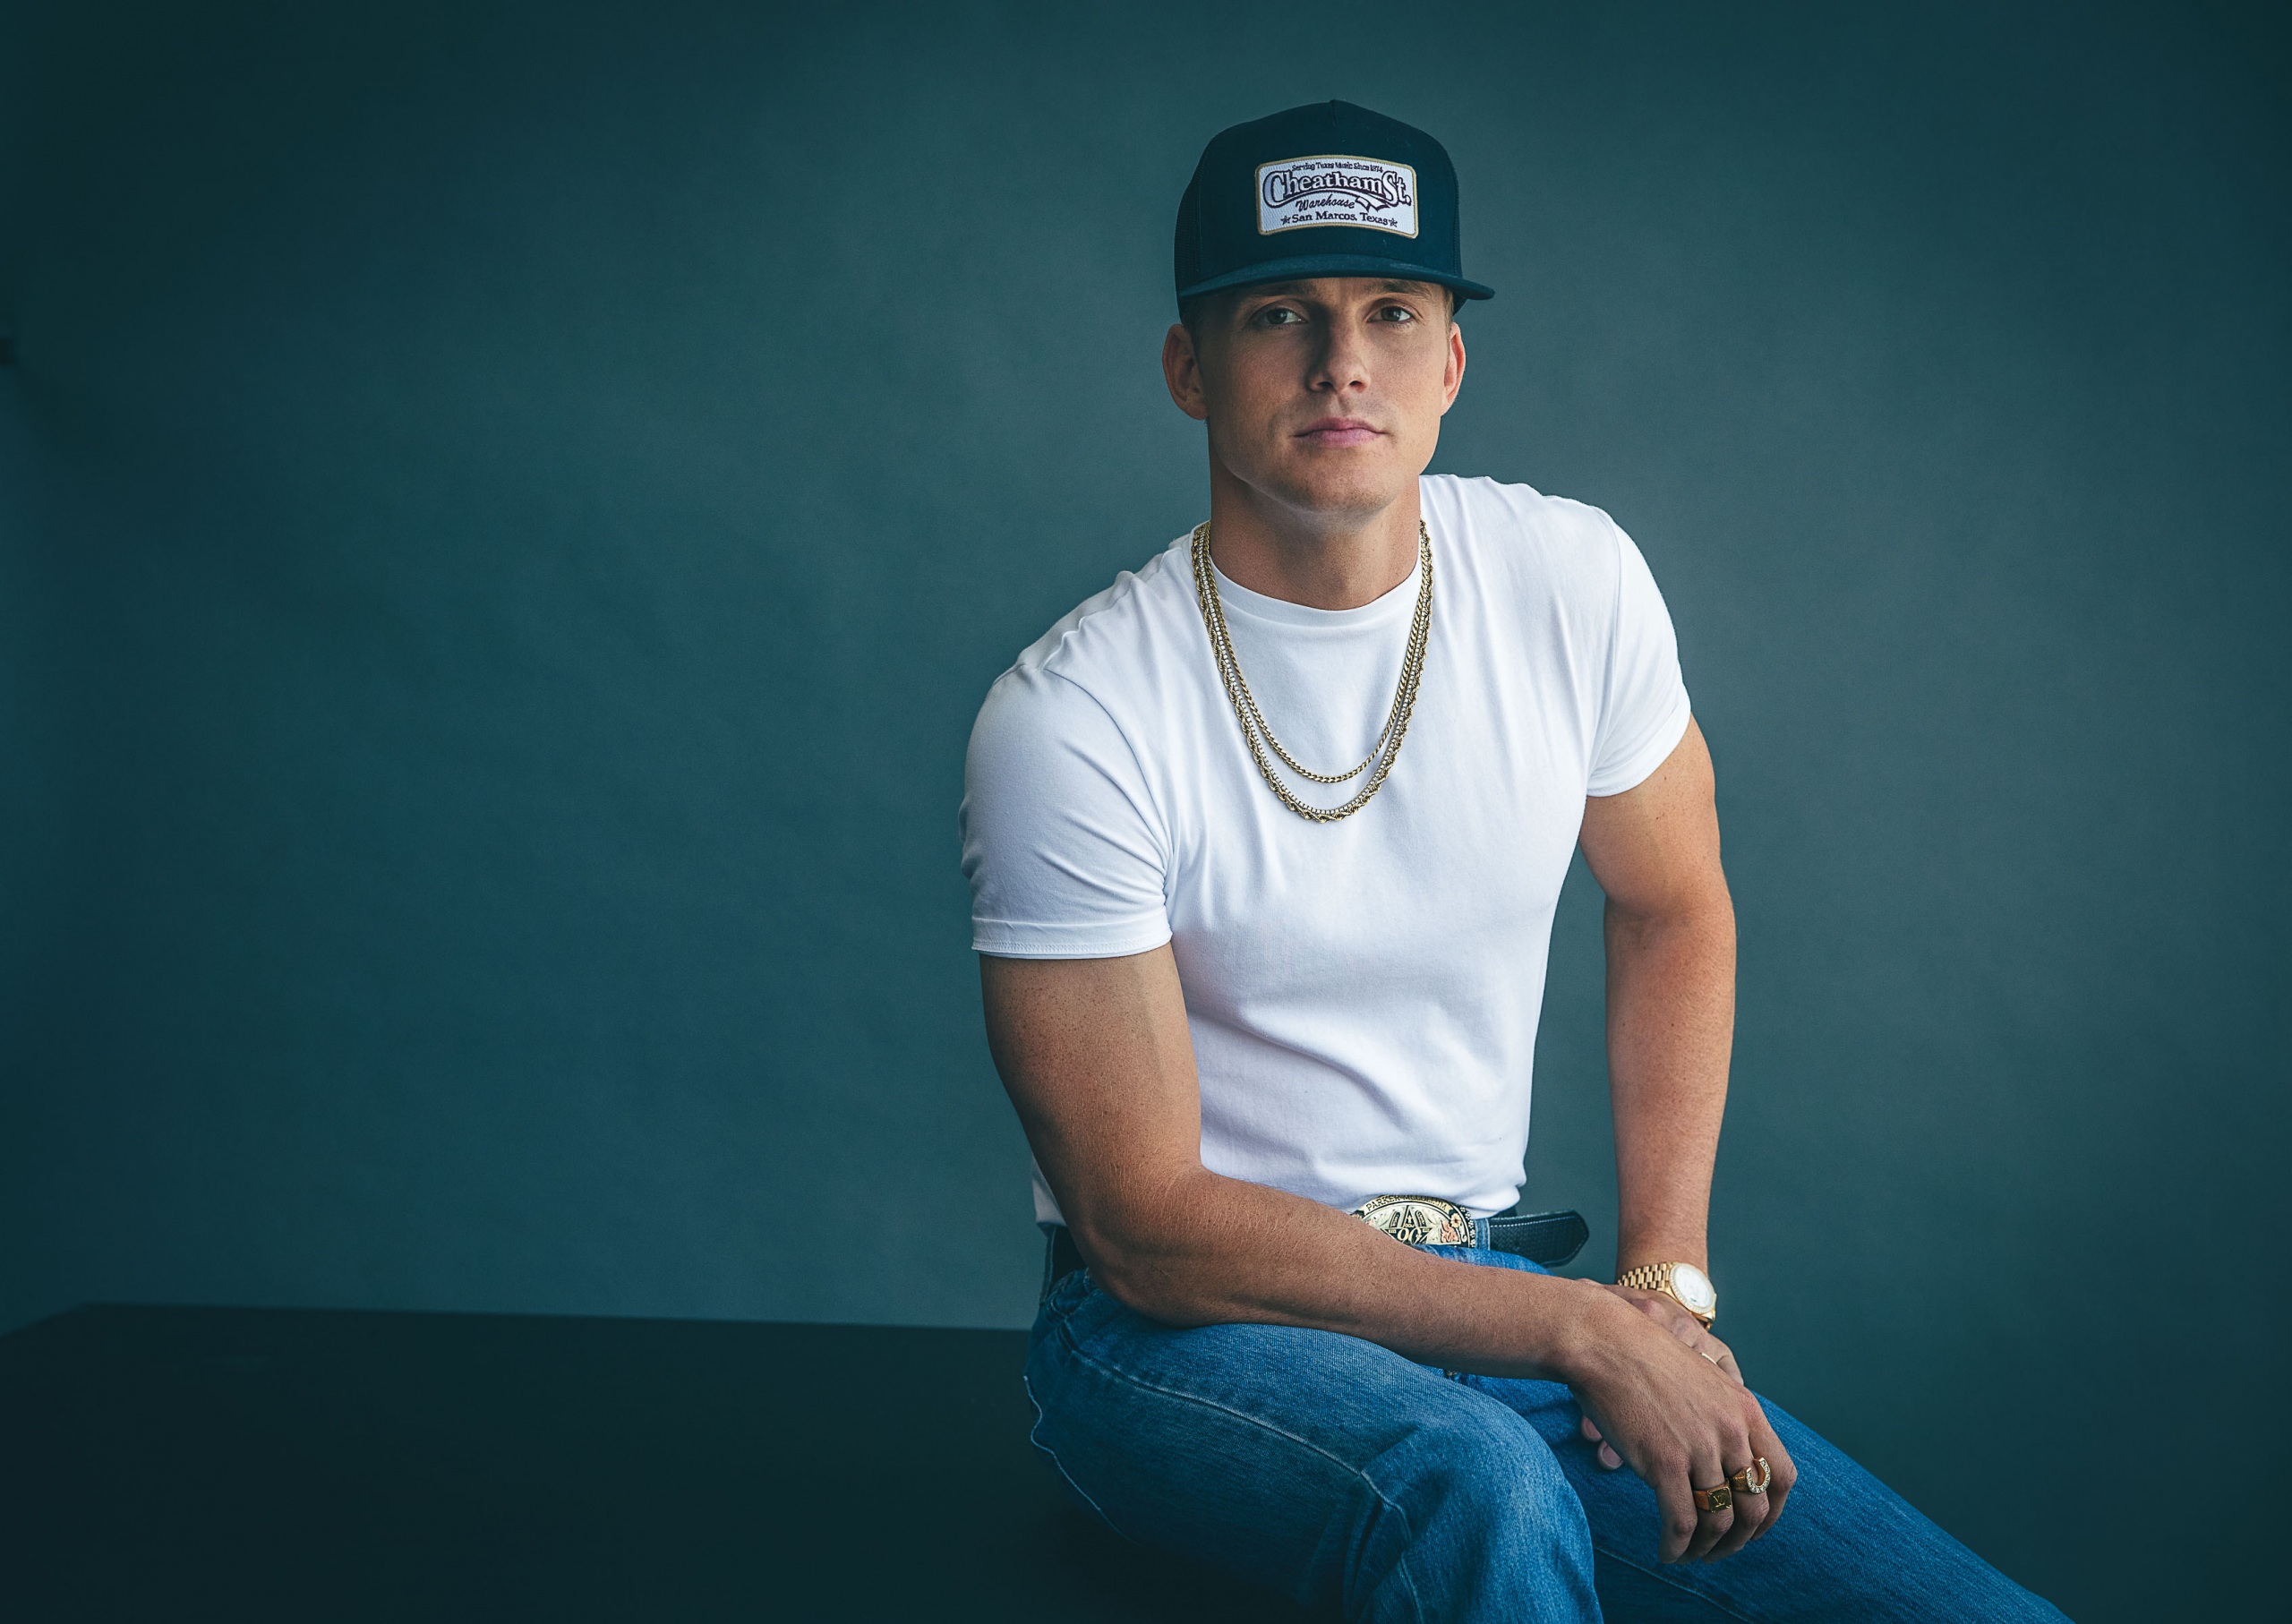 PARKER McCOLLUM ADDED TO THE LIST OF PERFORMERS AT THIS YEAR’S ACM AWARDS.